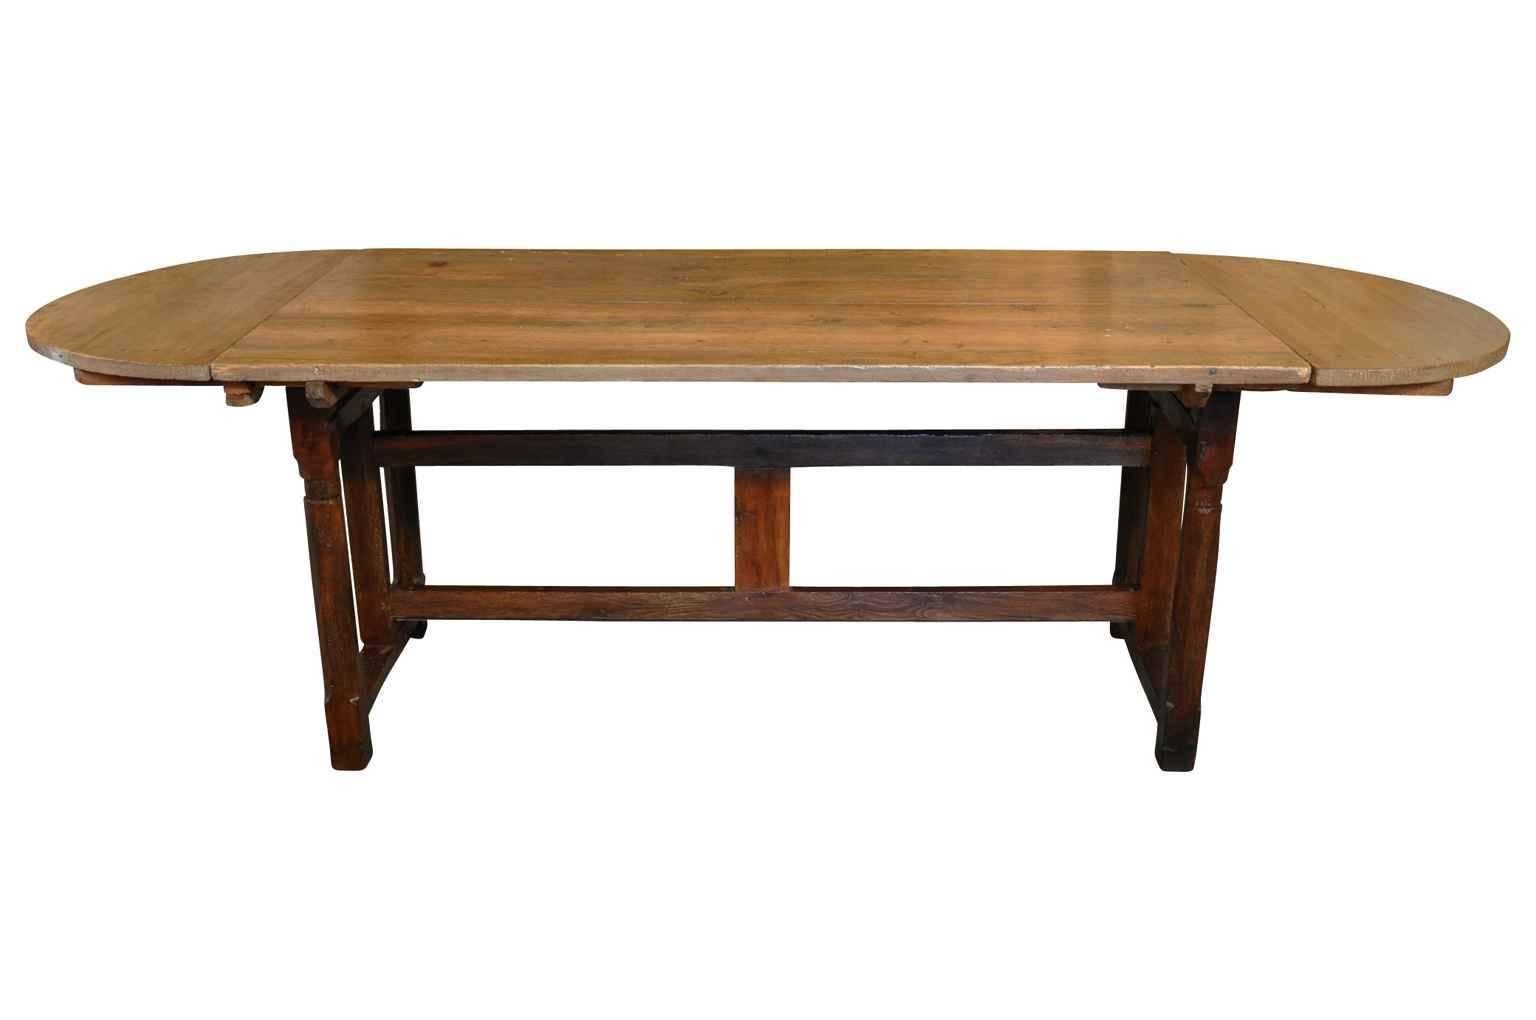 A wonderful later 19th-early 20th century French dining table. This terrific table disassembles for easy transport and storage. Sturdily constructed from sound oak.